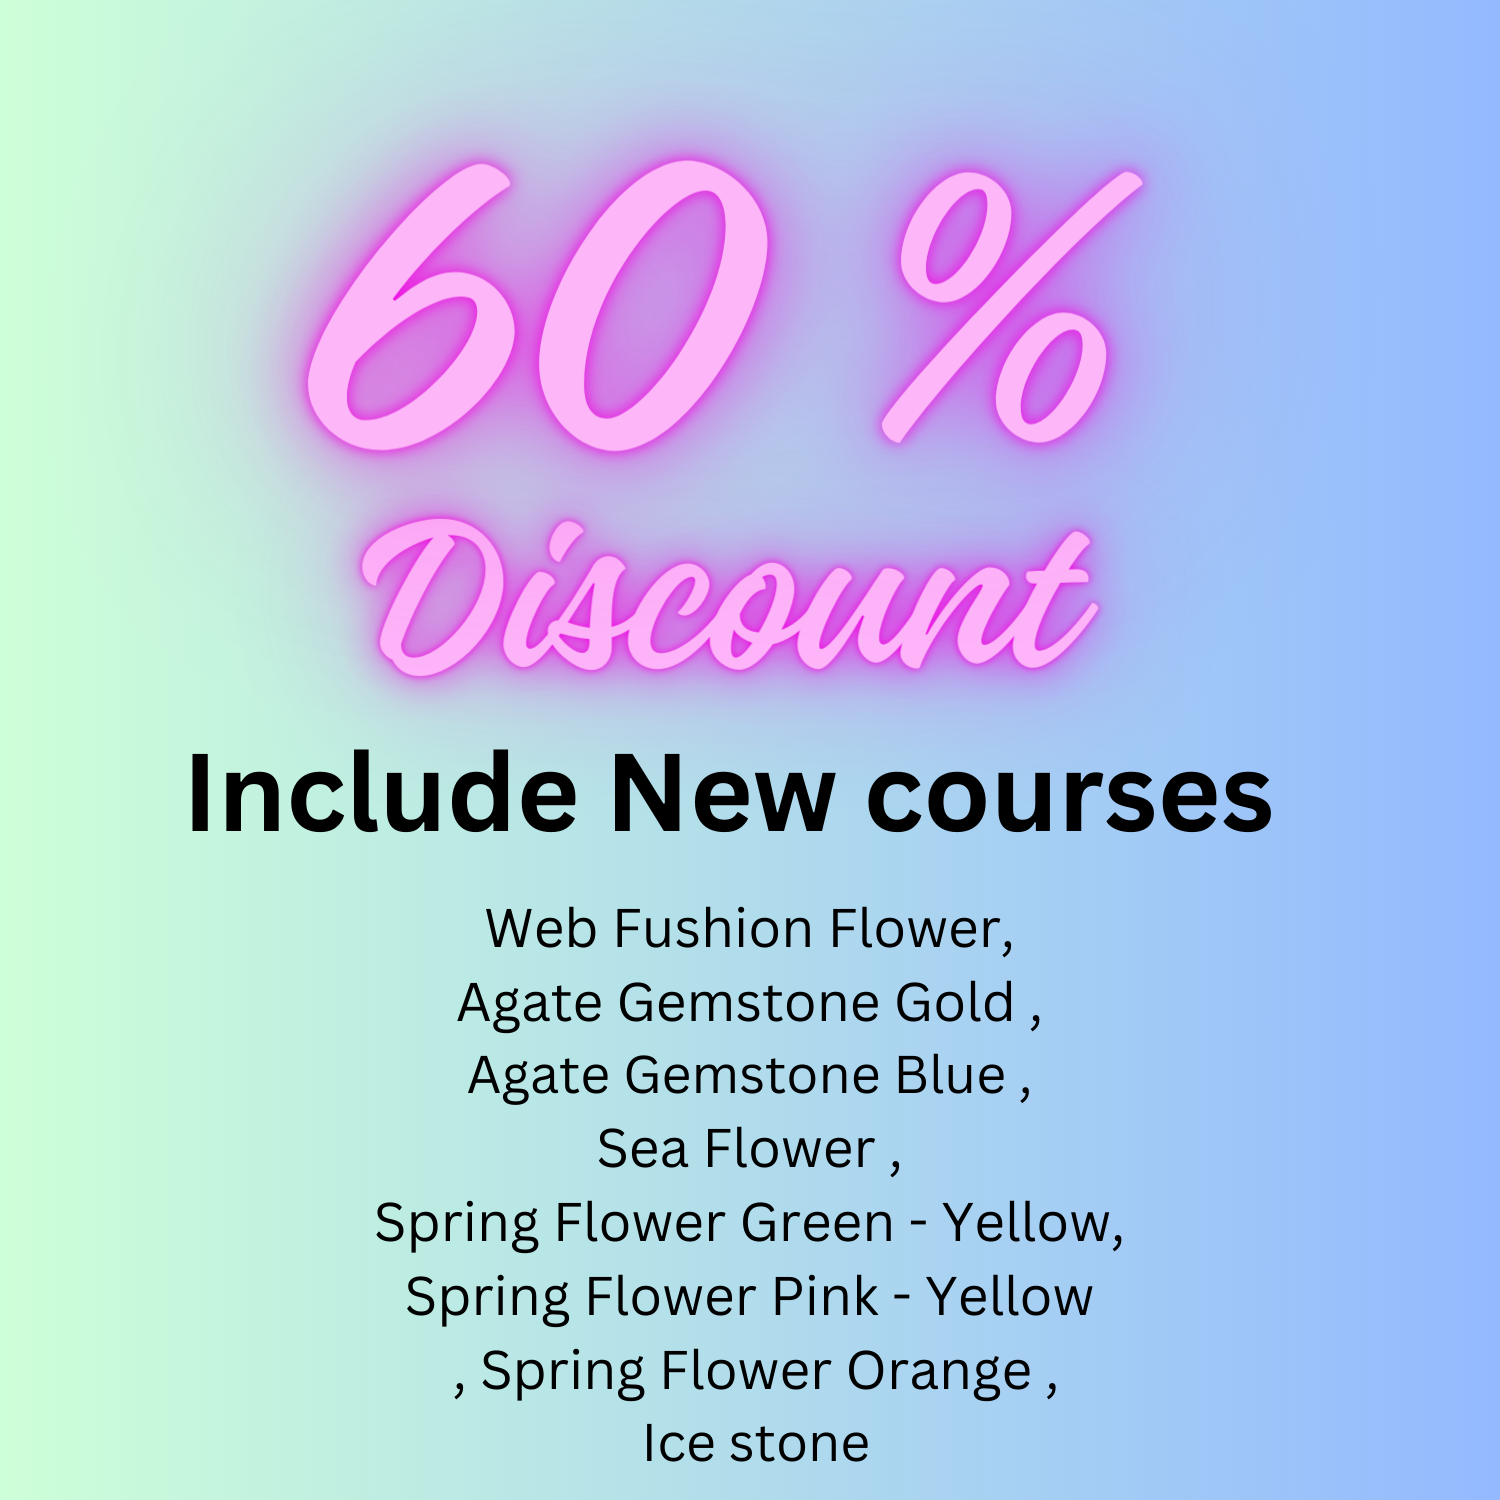 SALE OF NEW COURSES WITH 60% DISCOUNT